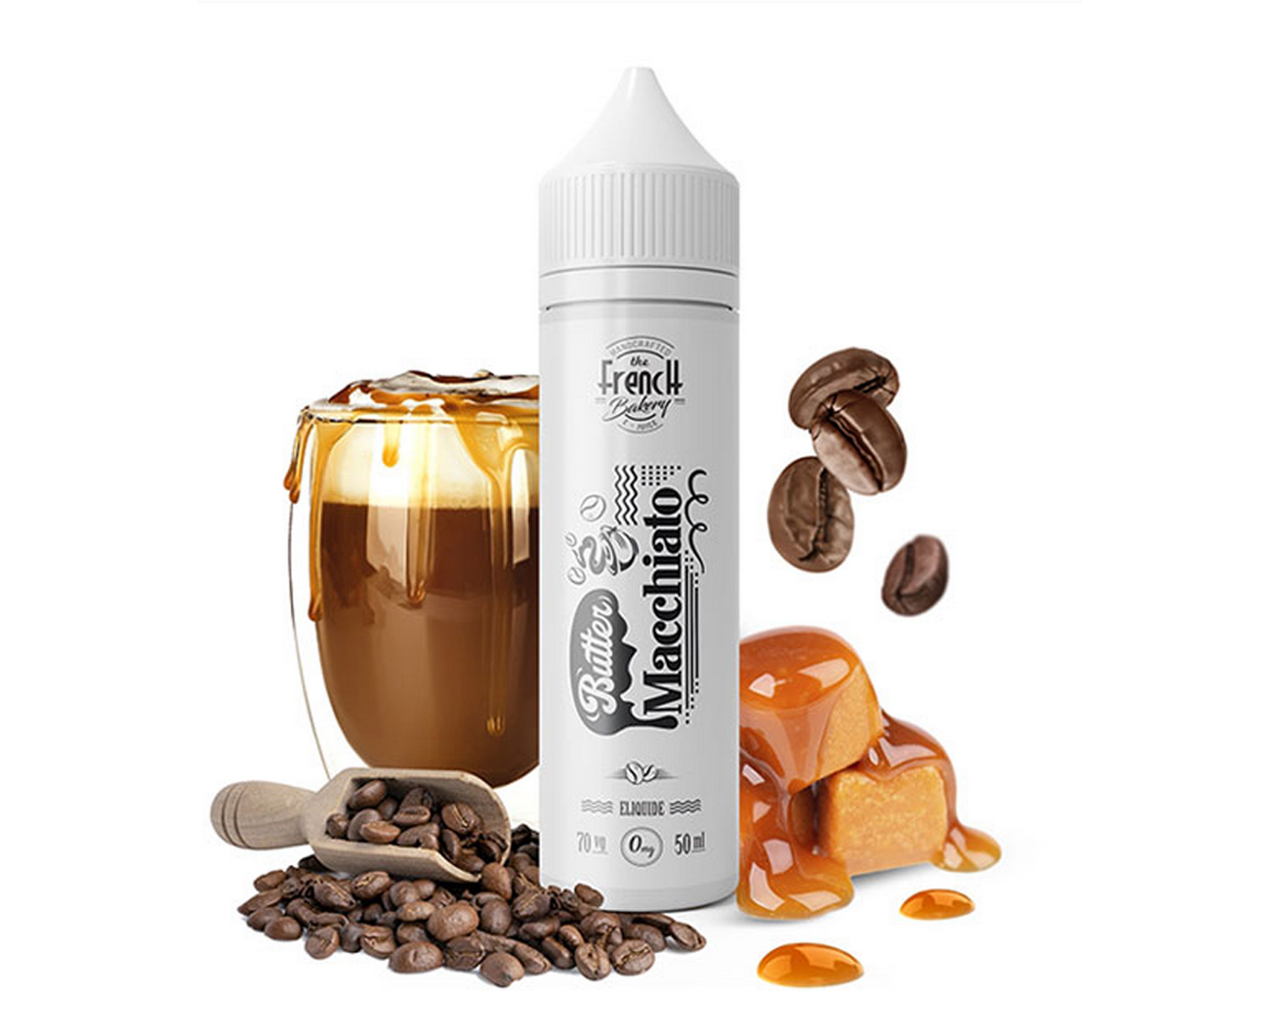 French Bakery Flavour Shot Butter Machiato